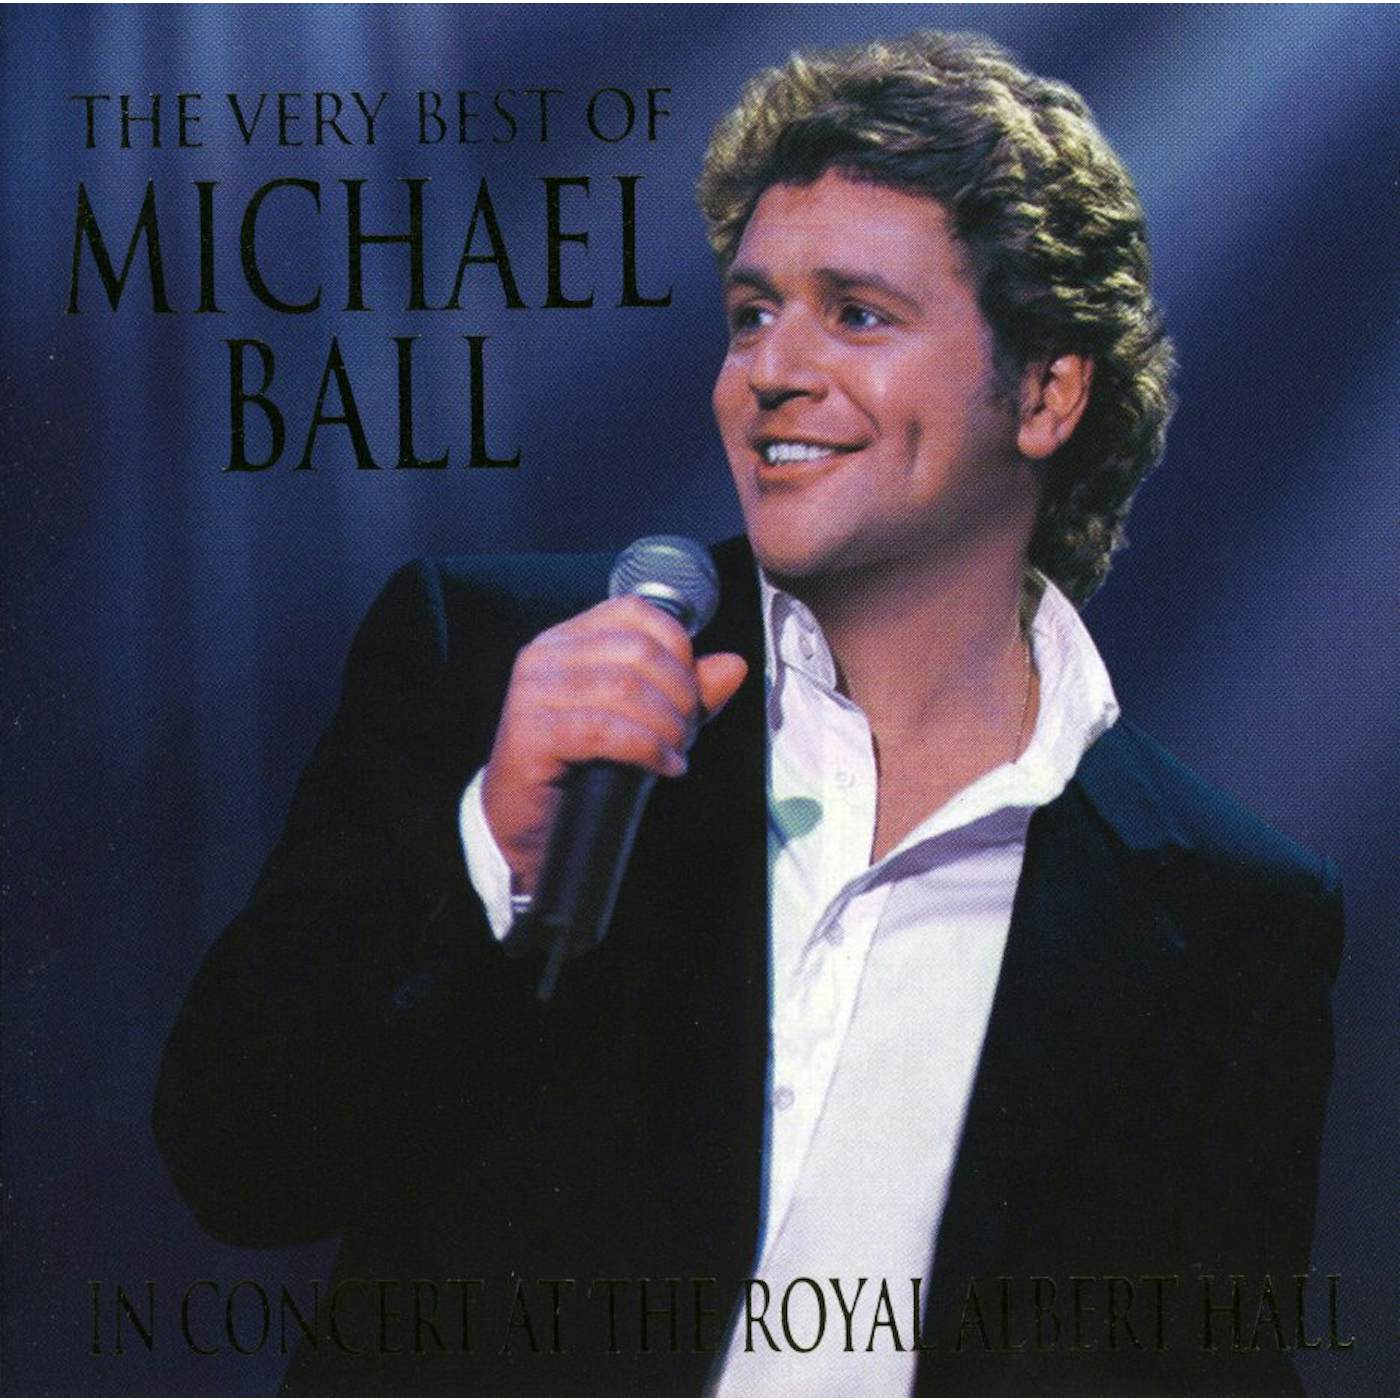 Michael Ball VERY BEST OF: IN CONCERT AT THE ROYAL ALBER HALL CD